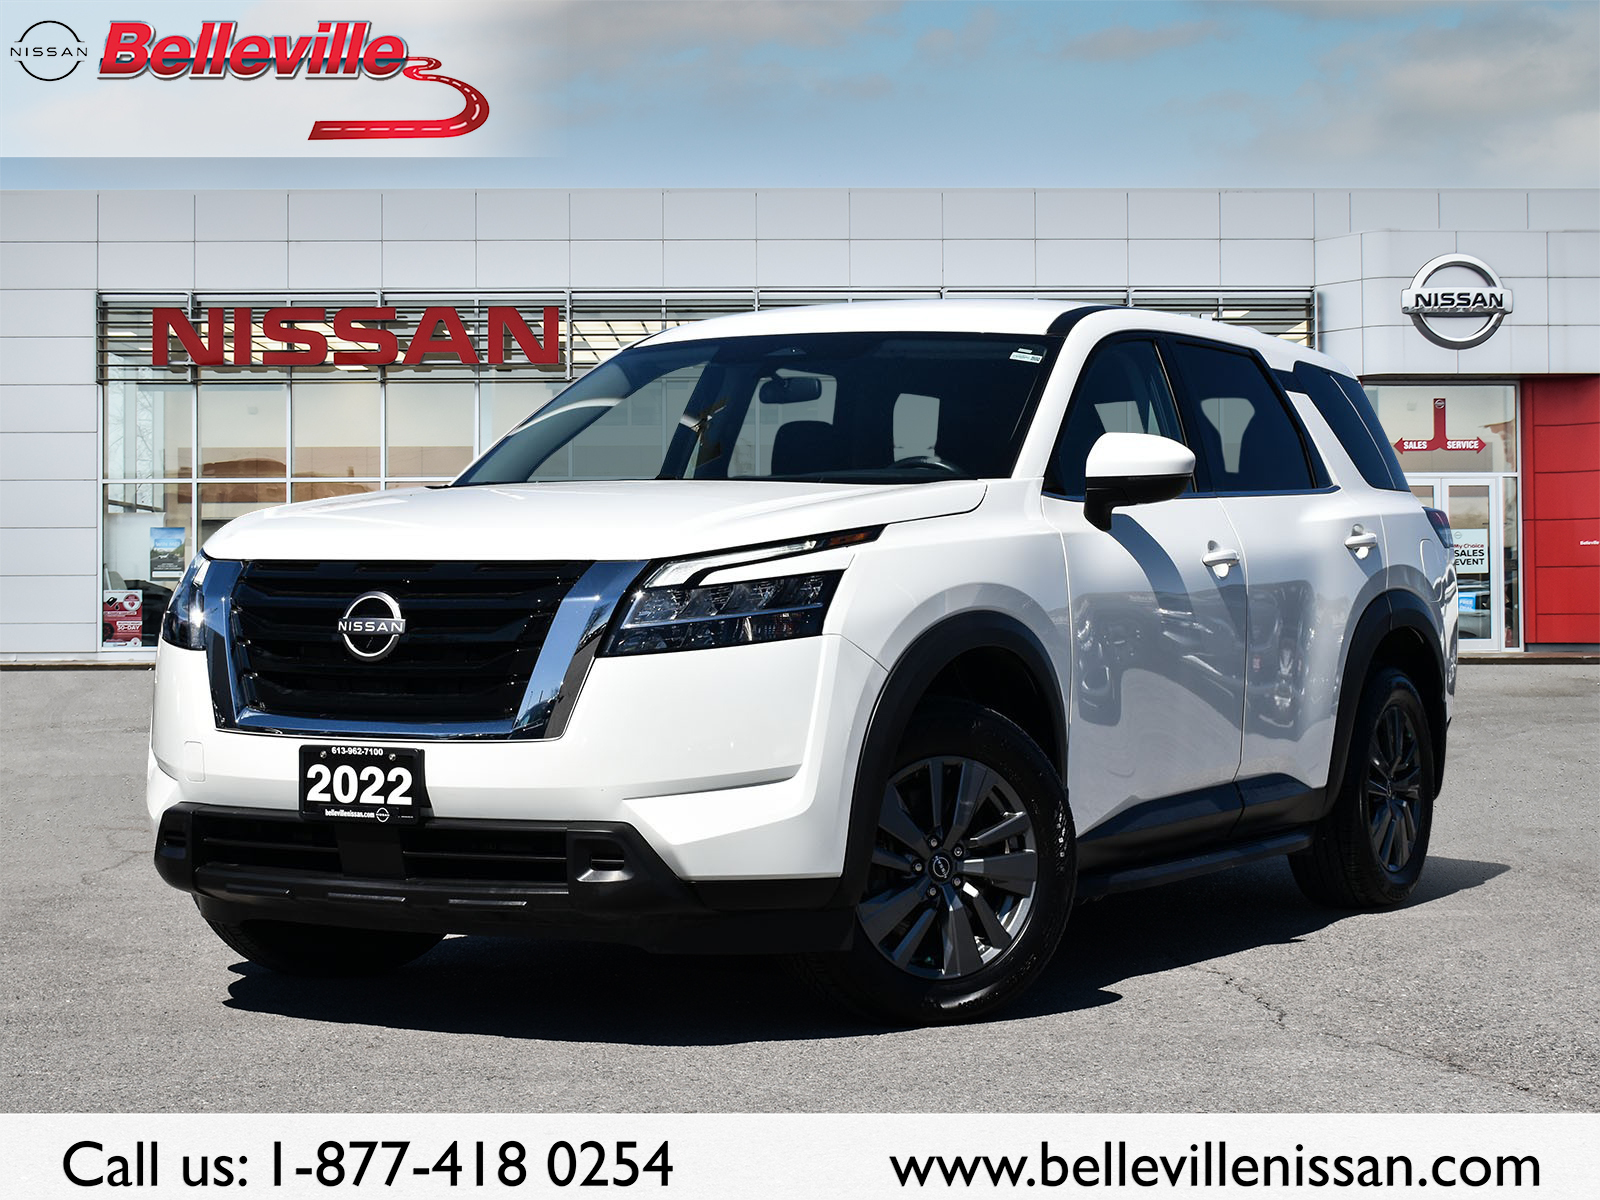 2022 Nissan Pathfinder S-4x4, ONE OWNER, LOCAL TRADE! 